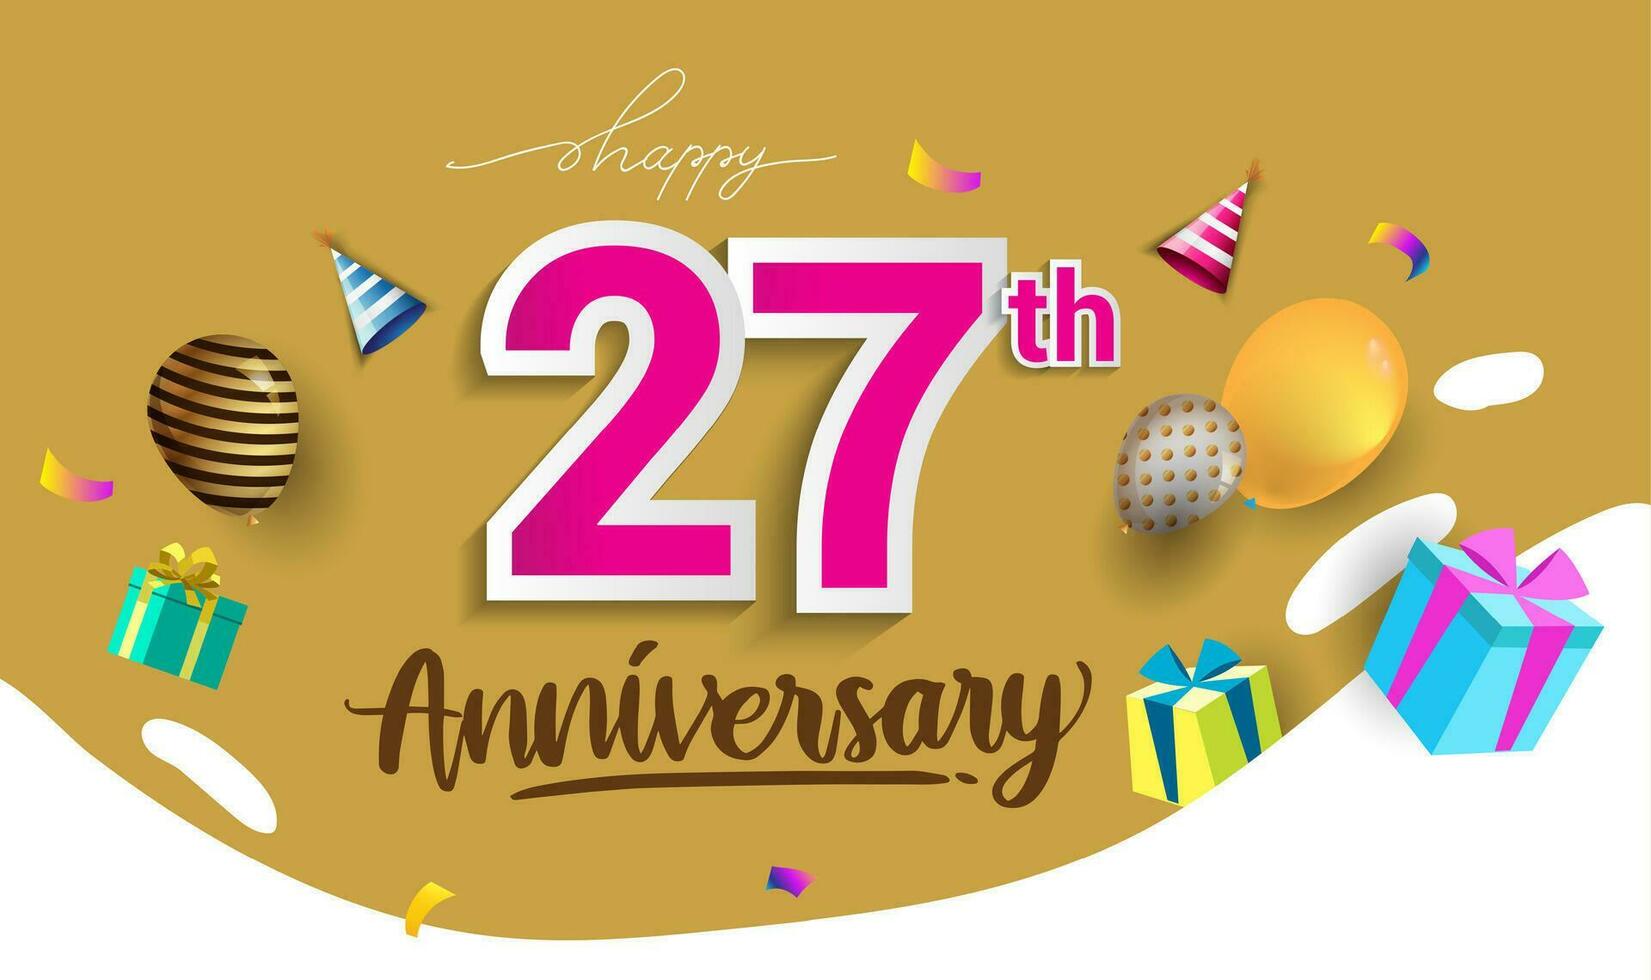 27th Years Anniversary Celebration Design, with gift box and balloons, ribbon, Colorful Vector template elements for your birthday celebrating party.